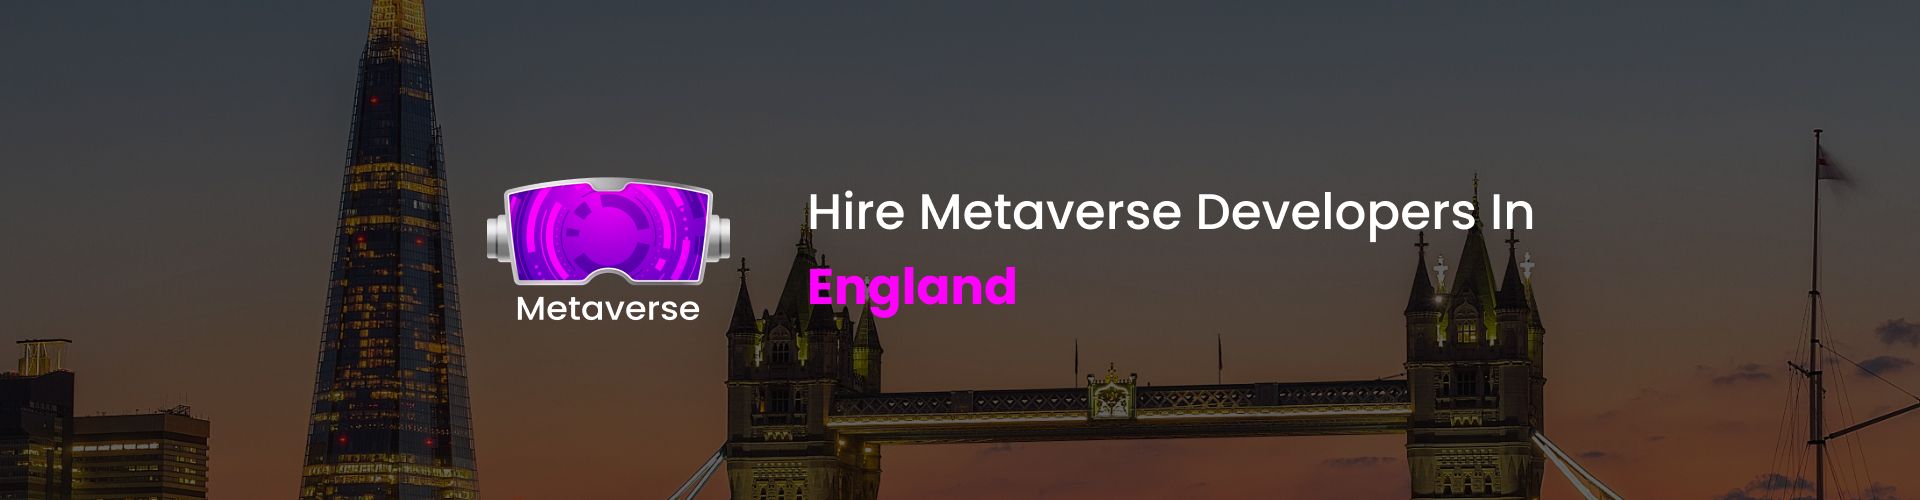 hire metaverse developers in england